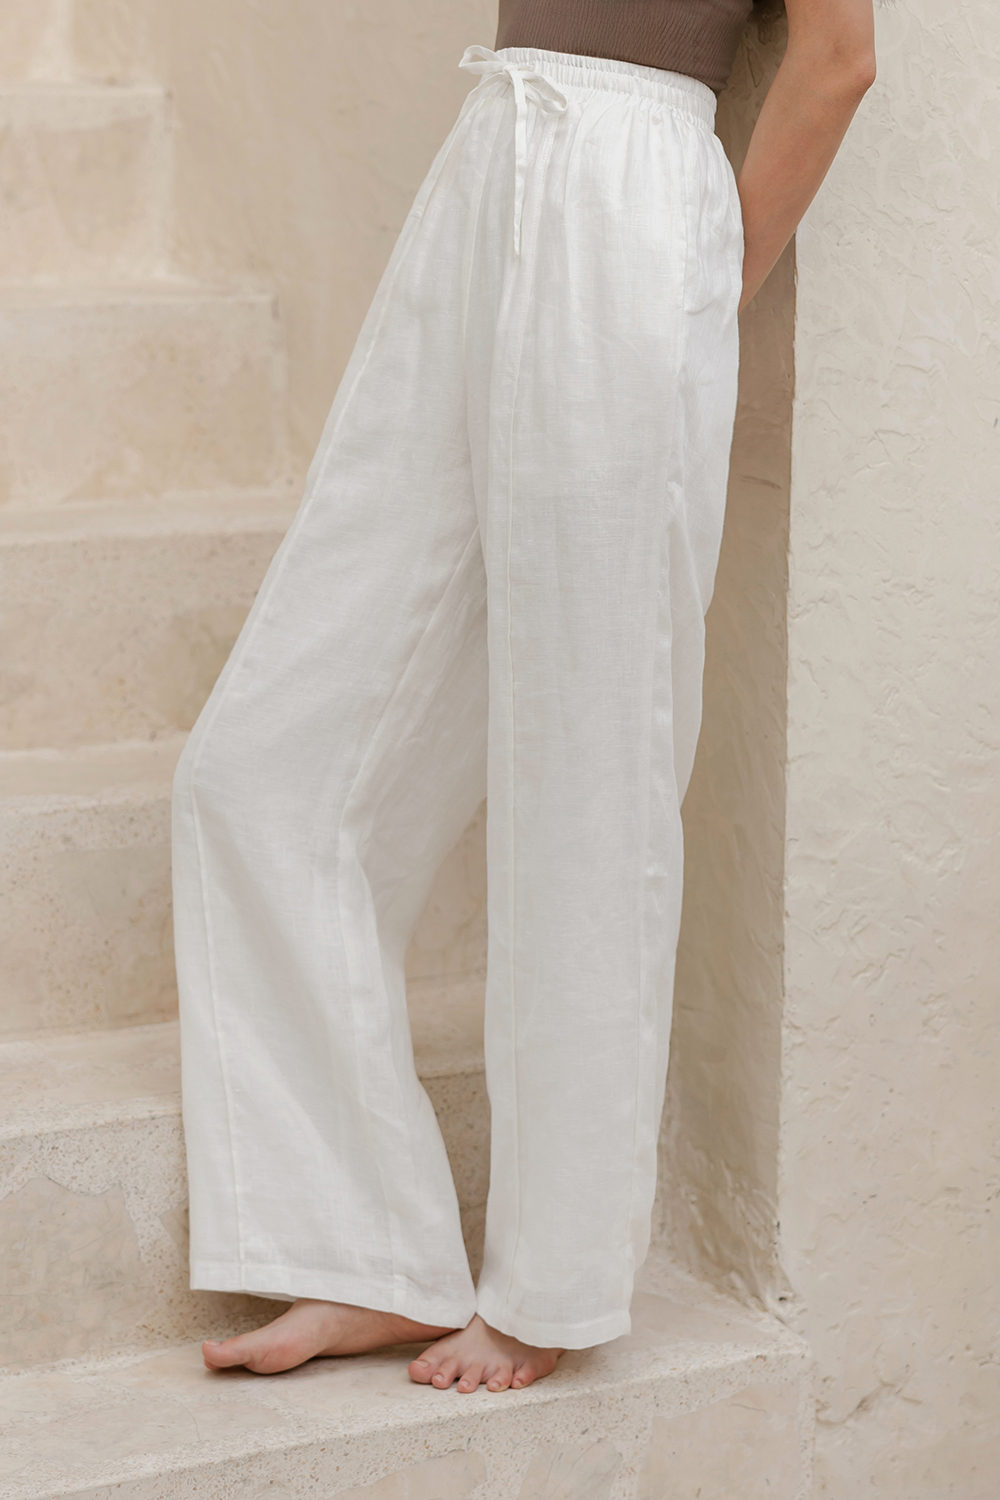 THE RETREAT LINEN PANTS IN WHITE